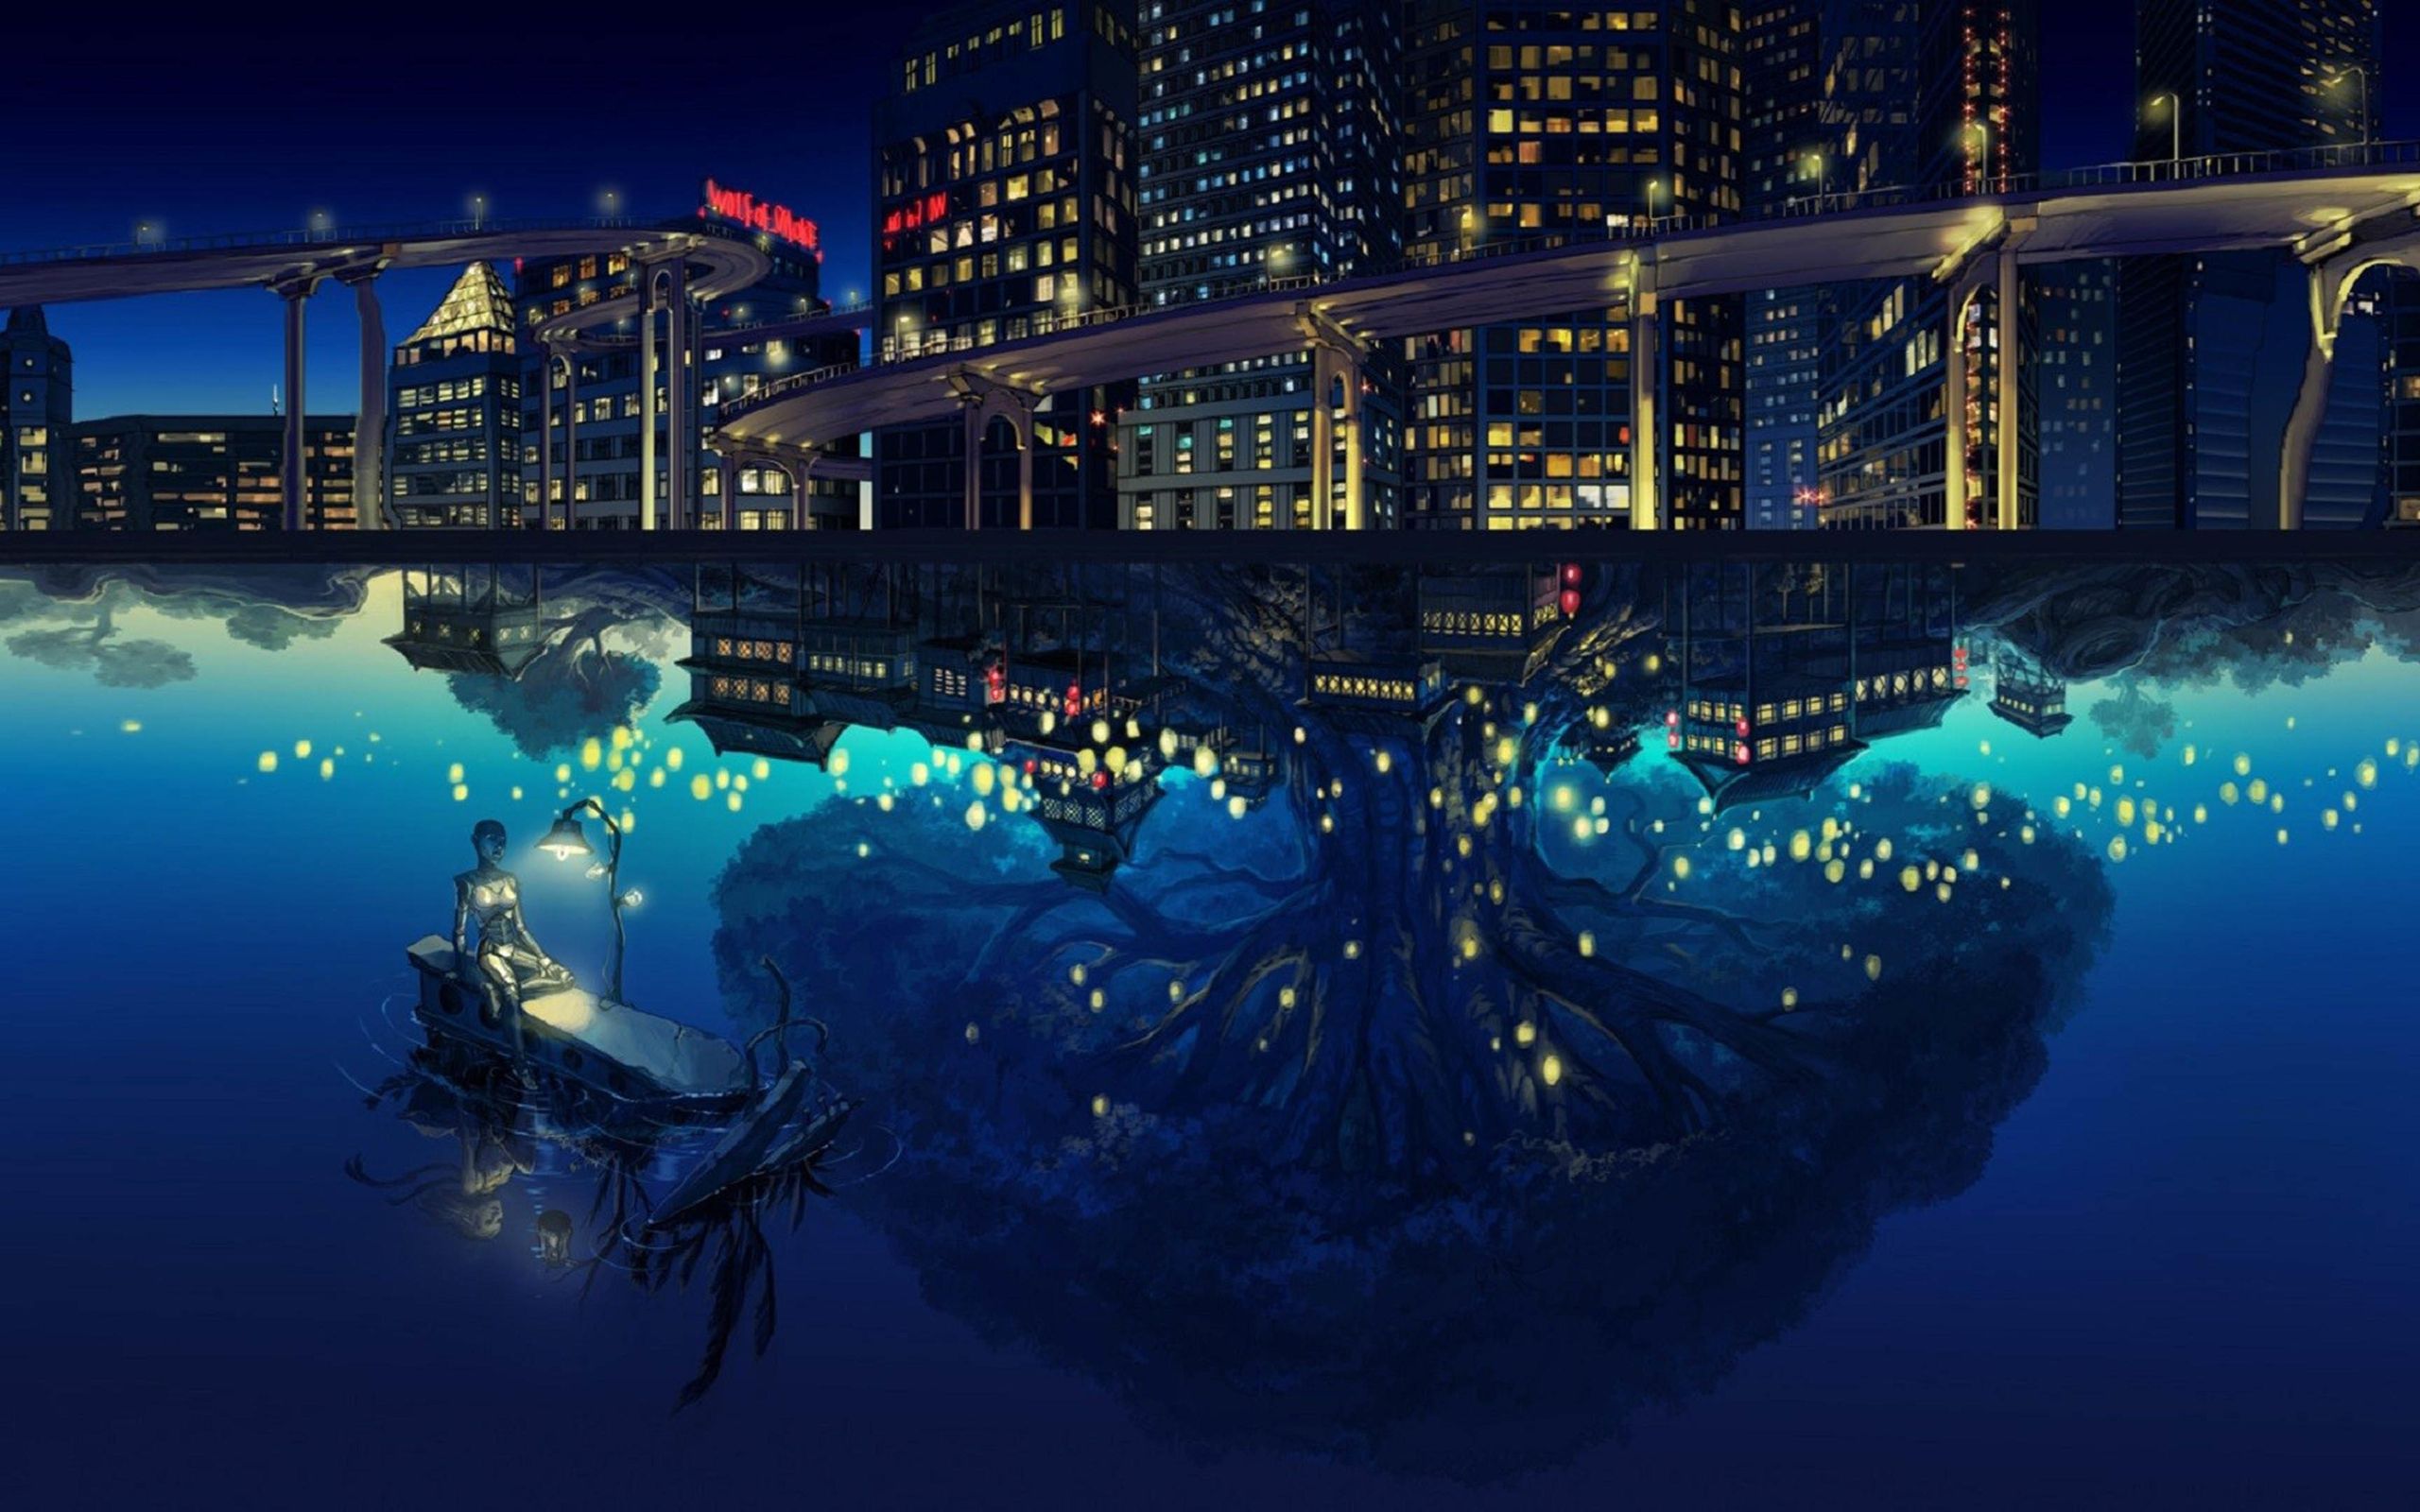 A city with lights and water in the background - 2560x1600